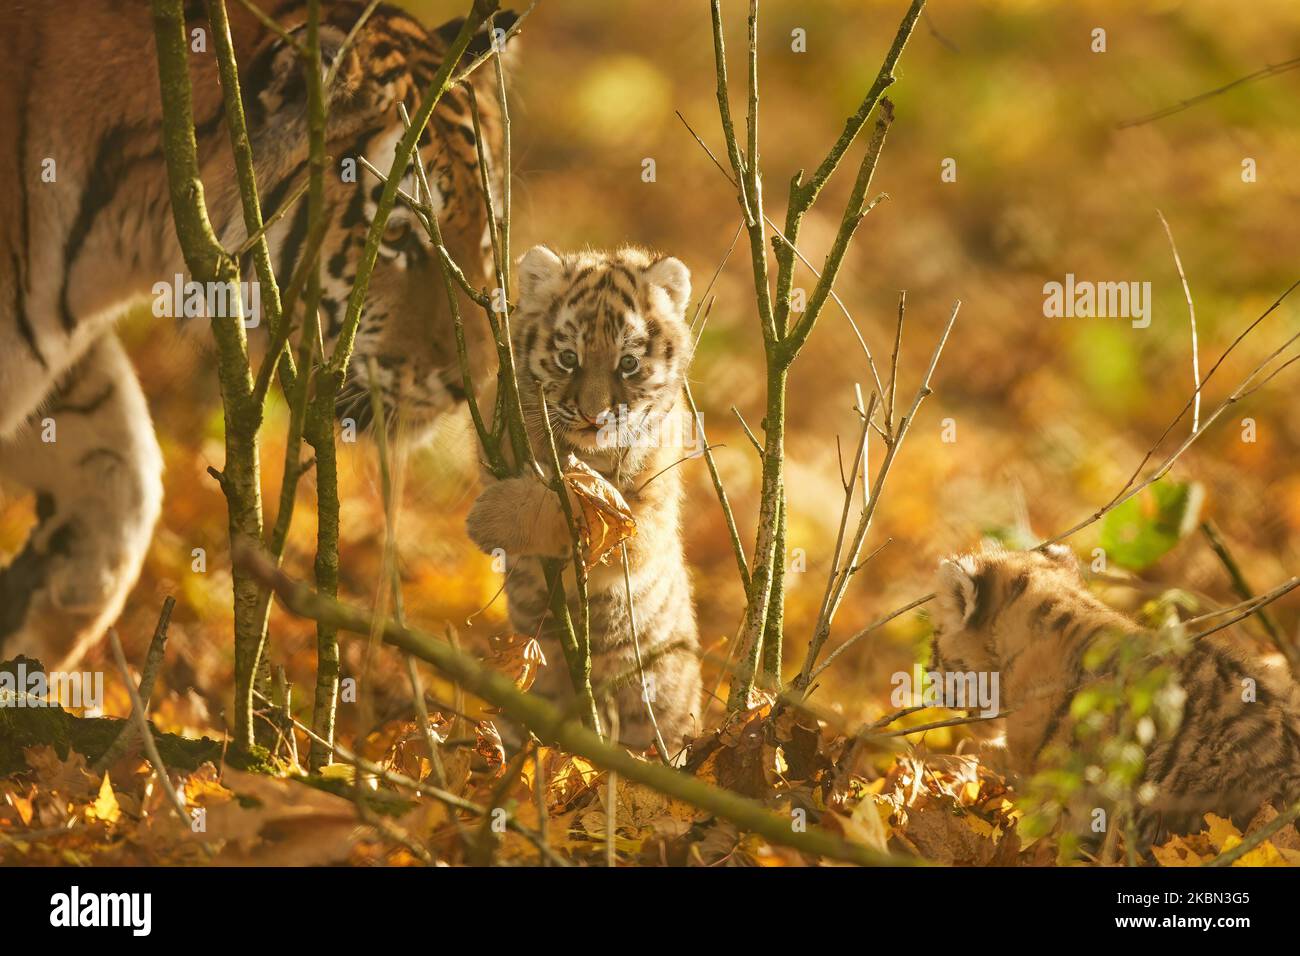 An Amur Tiger cub plays in the Autumn leaves at Banham zoo. Norfolk, UK: THESE ADORABLE images capture a tiger cub?s first exploration into the colour Stock Photo